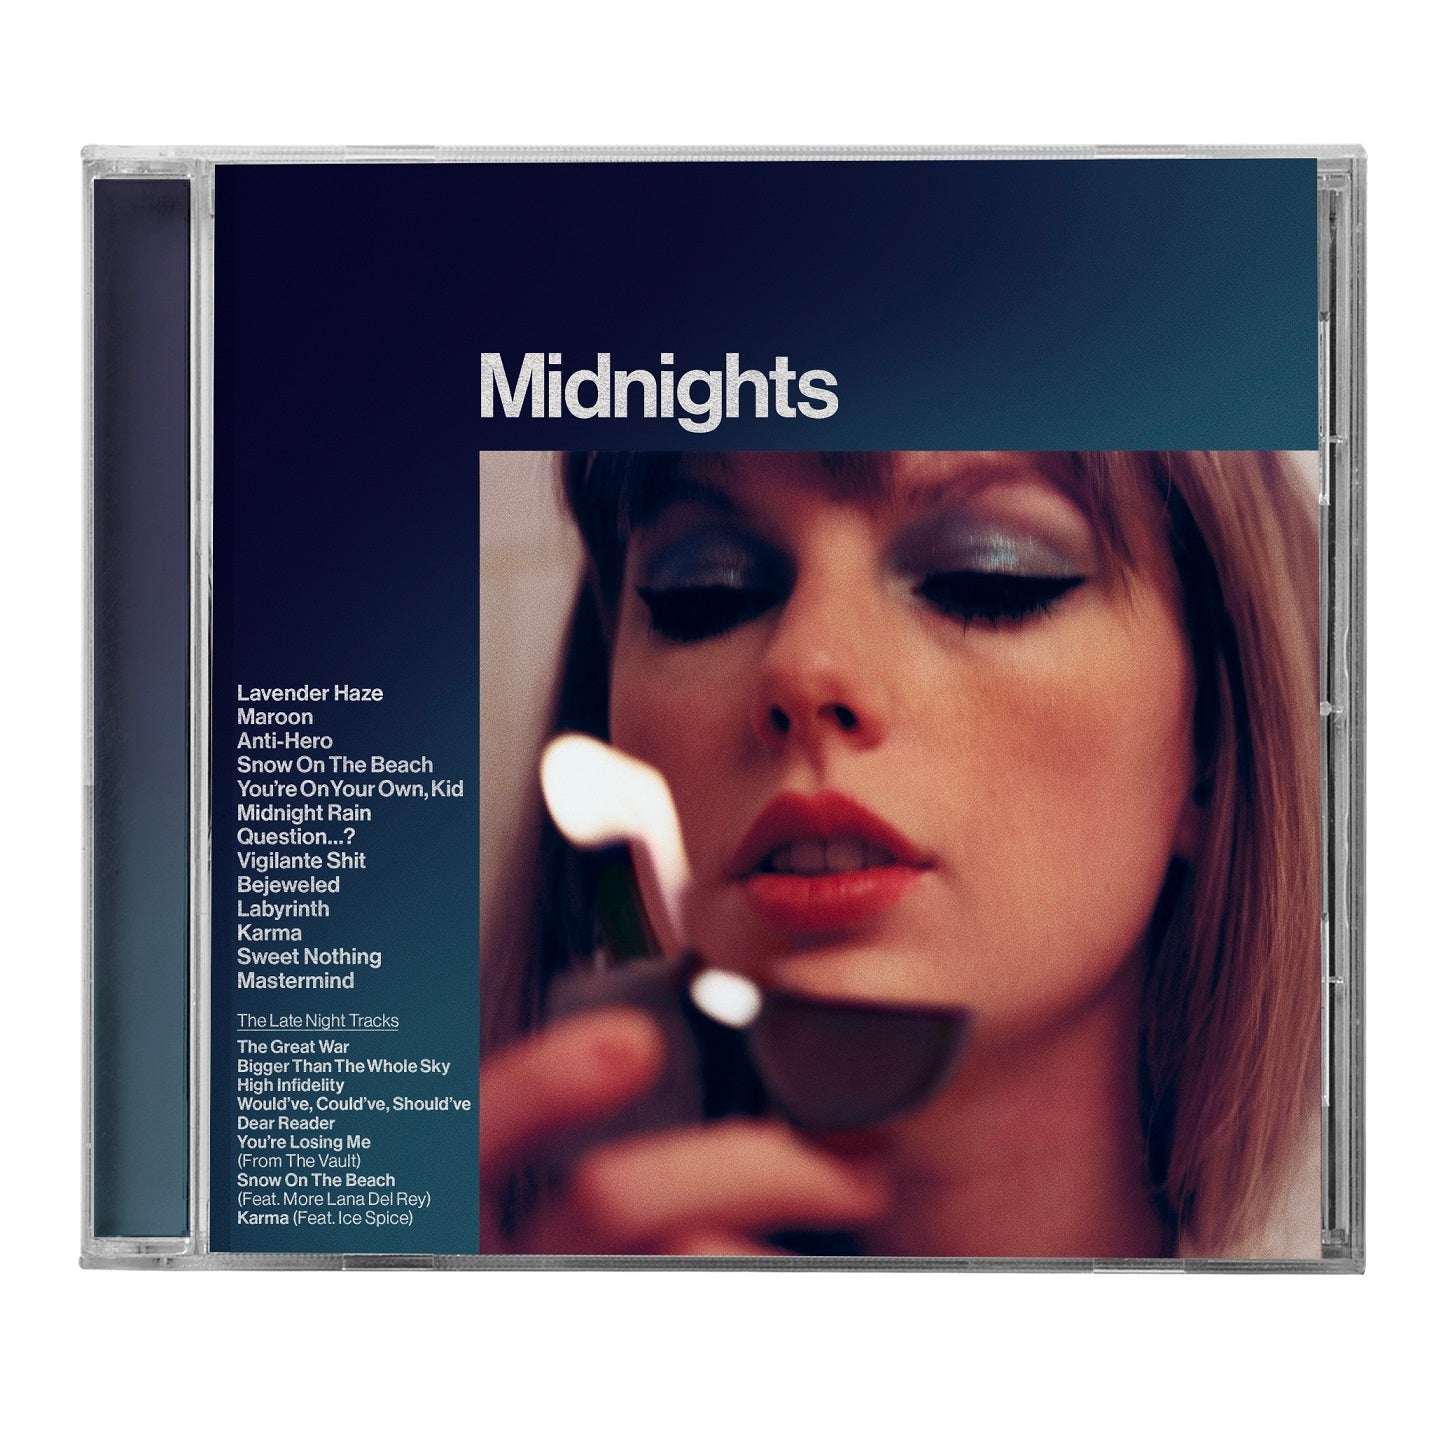 Taylor Swift- Midnights (The Late Night Edition)